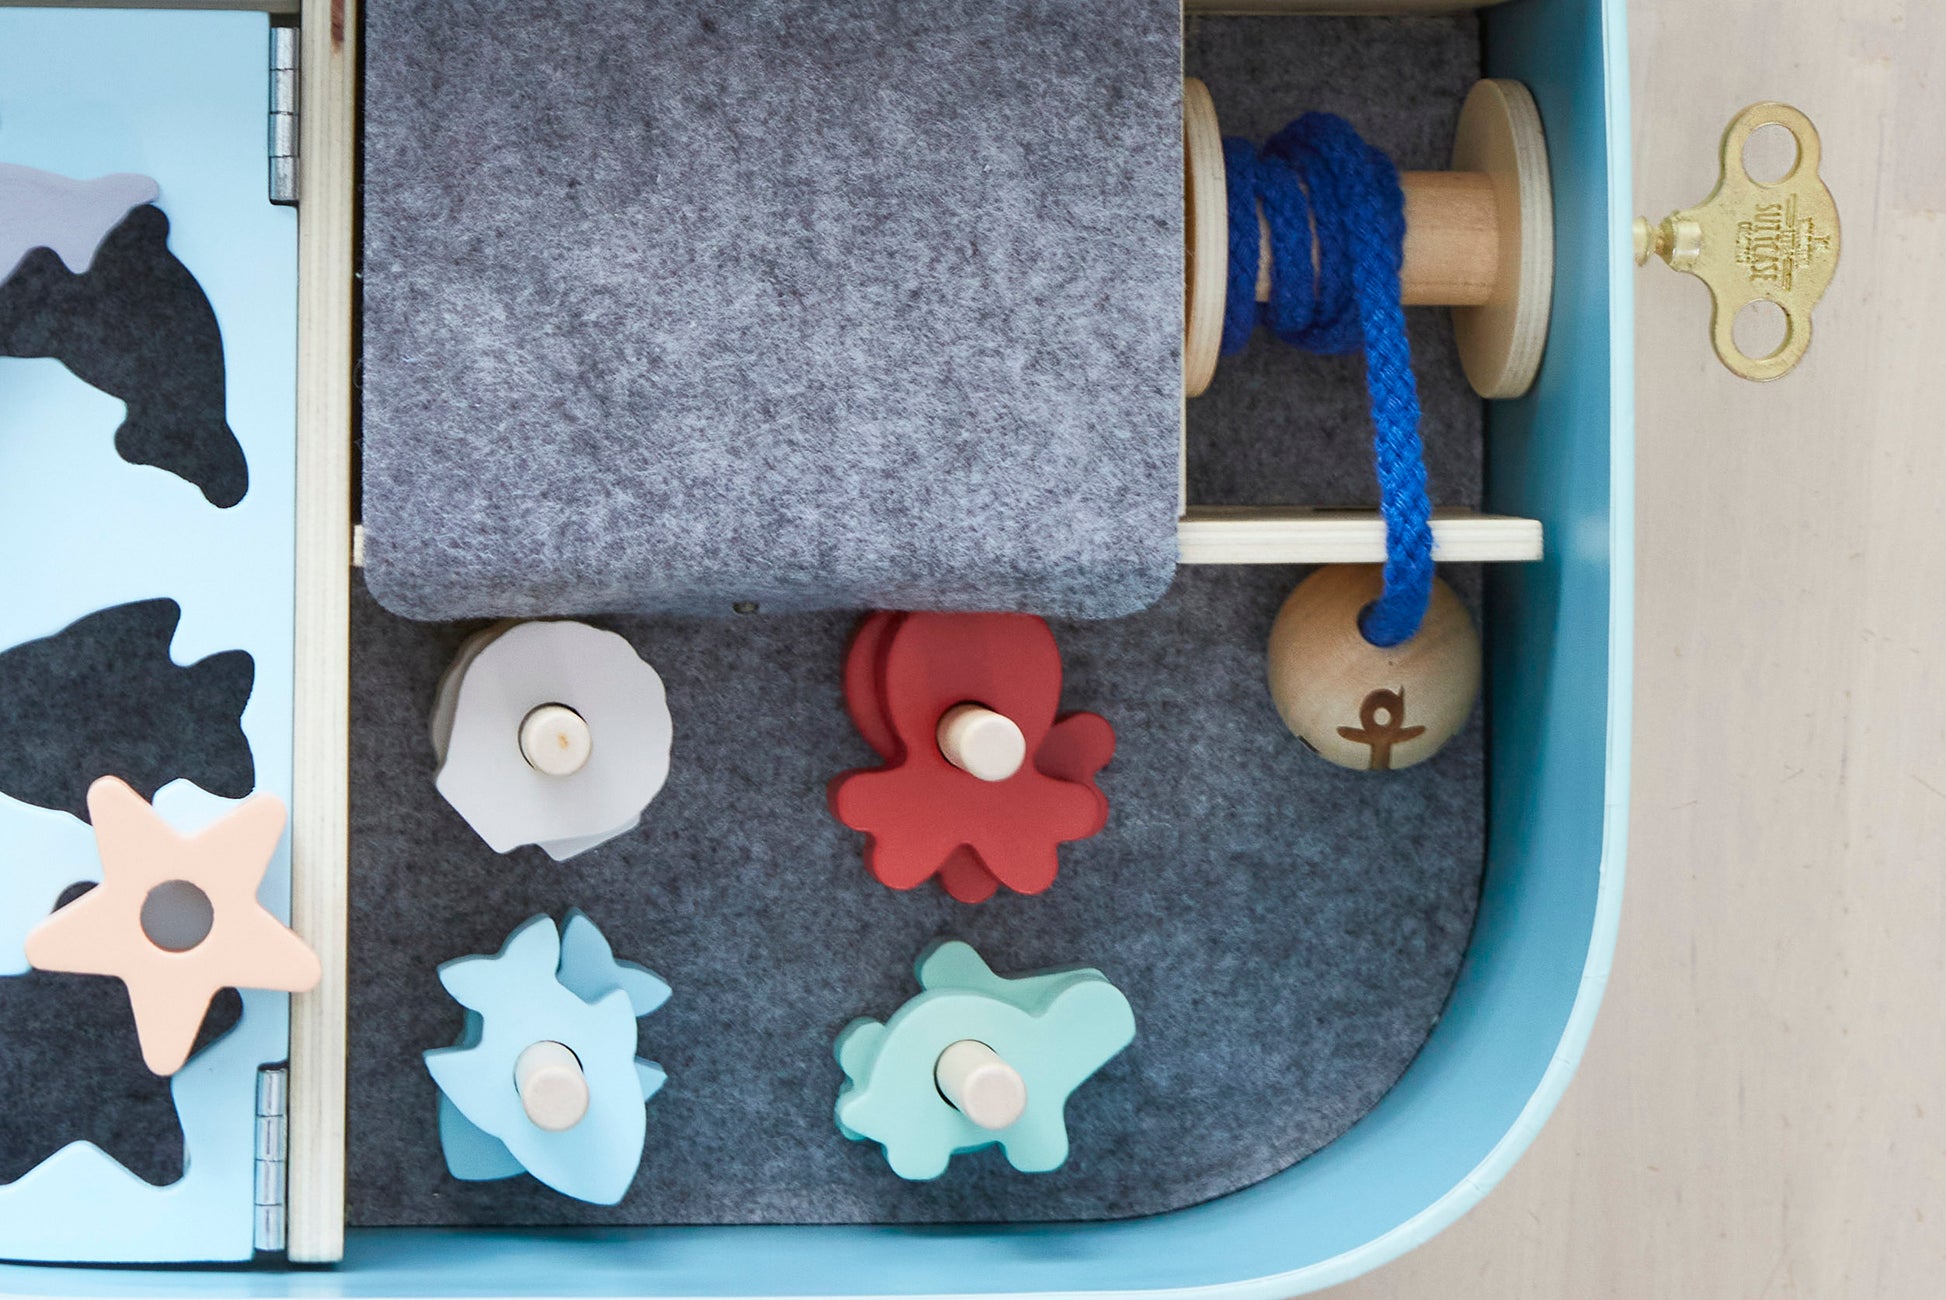 Ocean Lover Suitcase. Includes 1 treasure key, 16 wooden sea shapes, stickers and name tag for customising. Suitcase size 300 x 215 x 100 mm. Materials: sustainable & recycled materials (FSC timber, recycled felt, cardboard). Original, educational and ethically produced. Supporting cognitive, fine motor, problem solving skills & imaginative play. Easy to pack and carry around. Suitable for children age 3+ years.  Designed and prototyped in Australia. Environmentally friendly packaging.